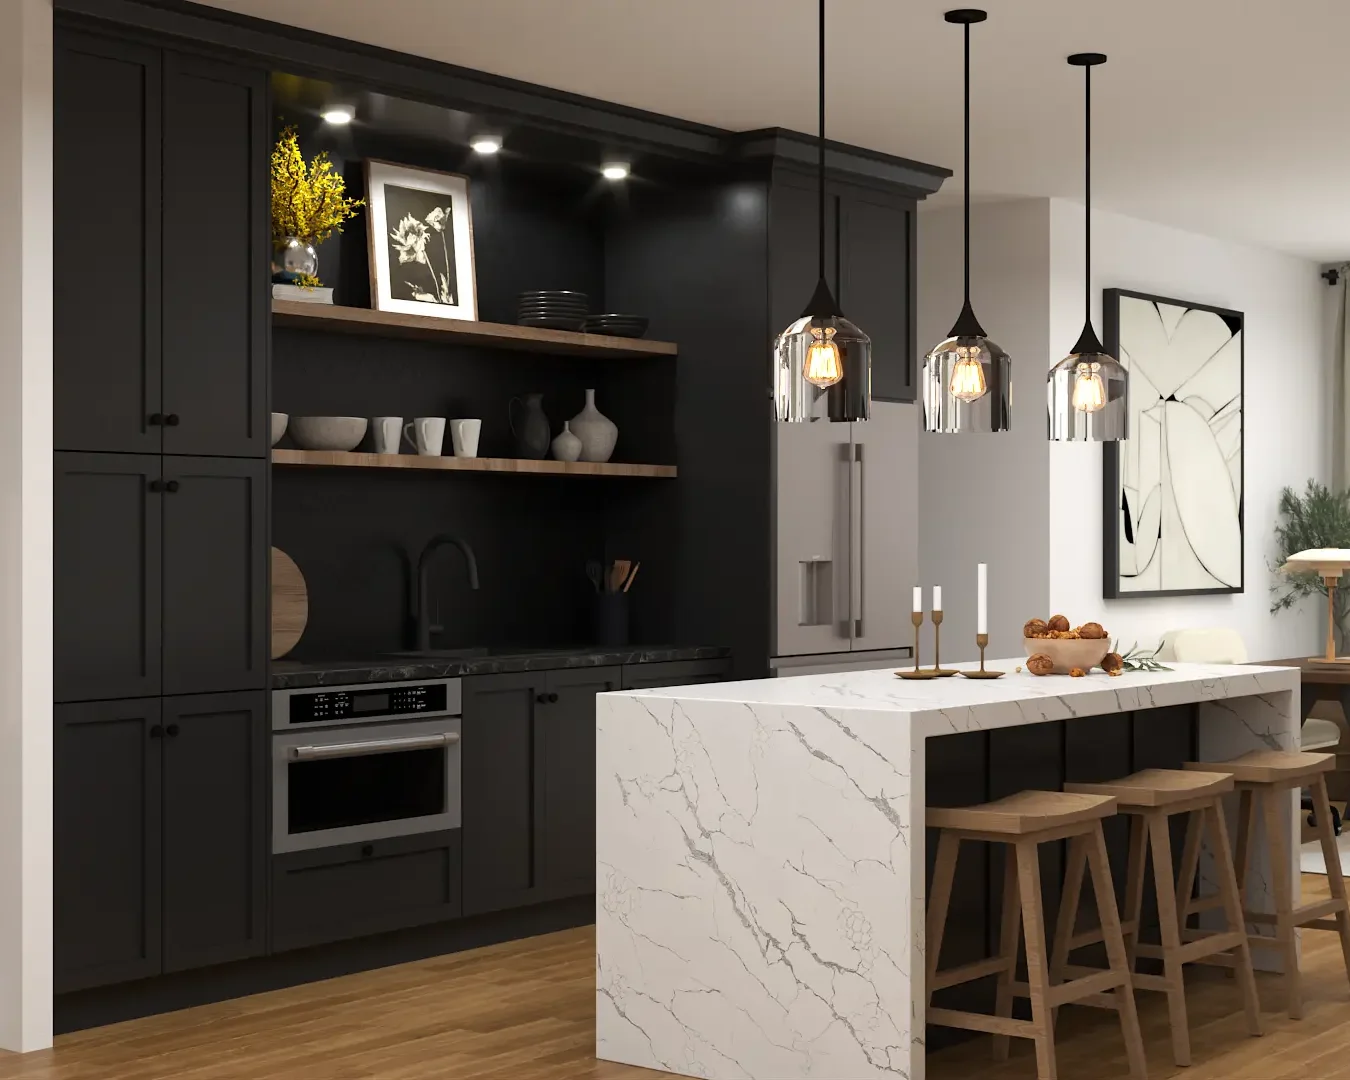 Chic kitchen with black cabinetry and a luxurious white marble island, highlighted by stylish pendant lighting. Design by Debora, based in New York.